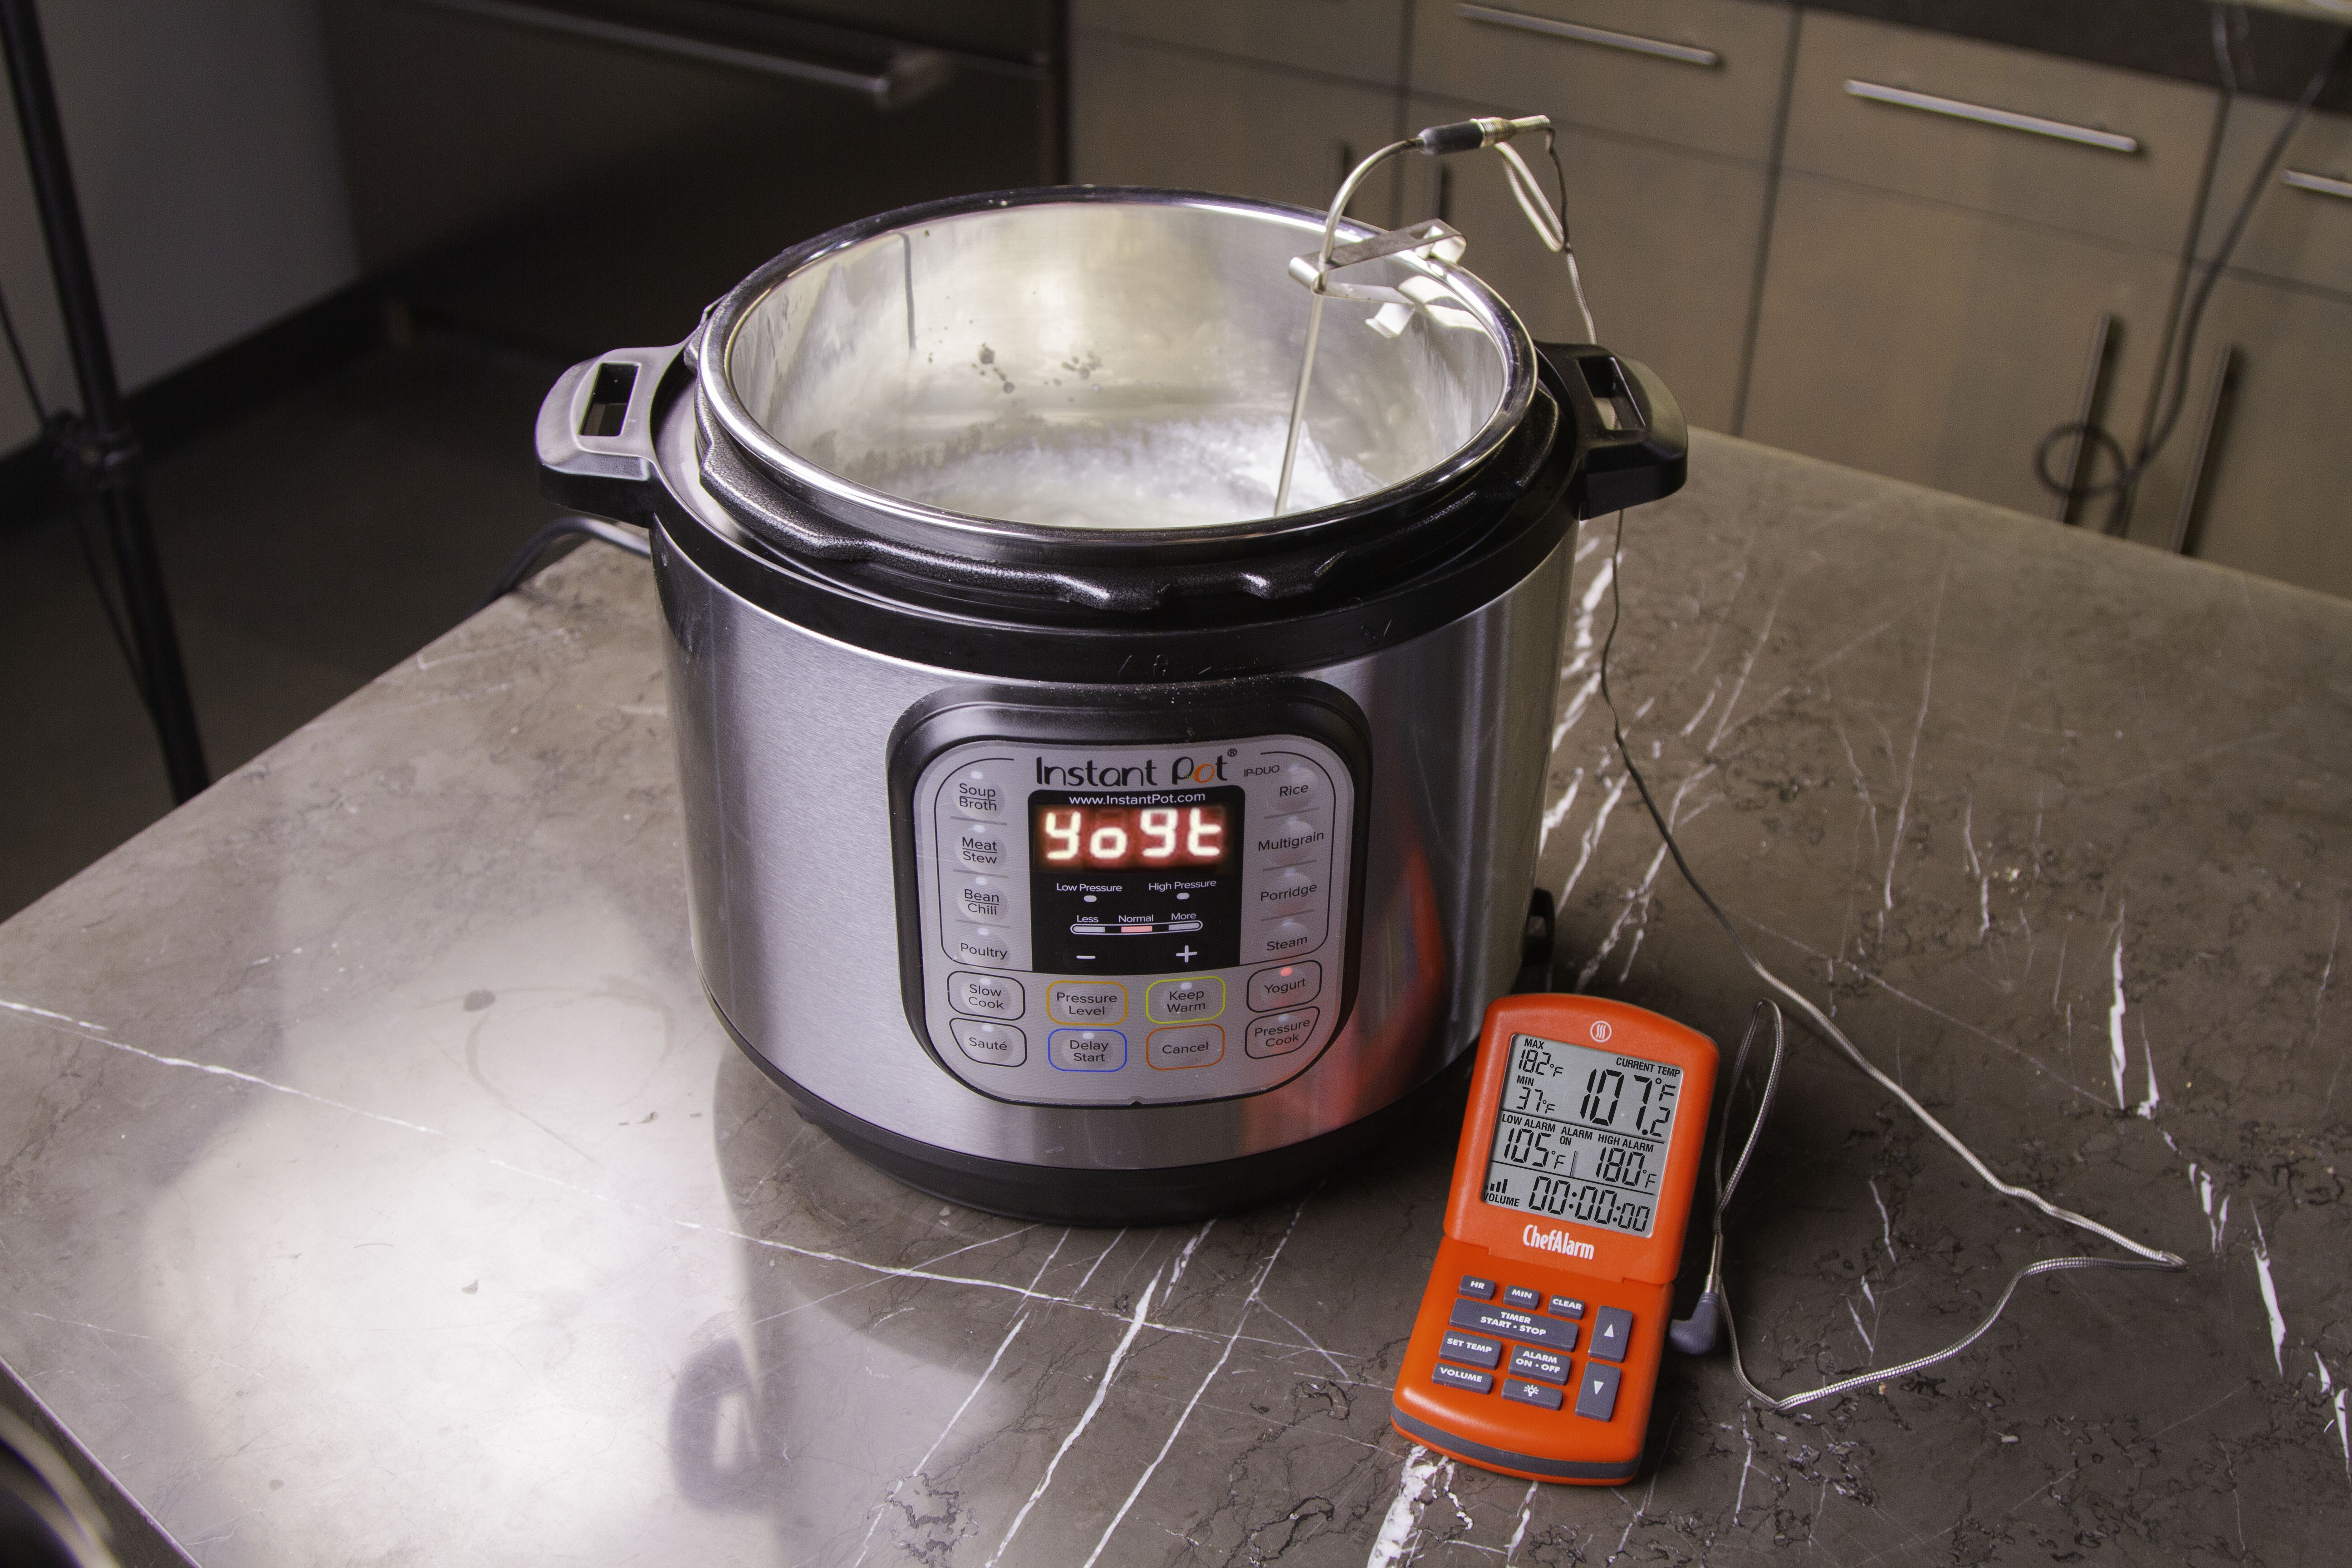 Can You use a Thermometer with a Multi-Cooker?